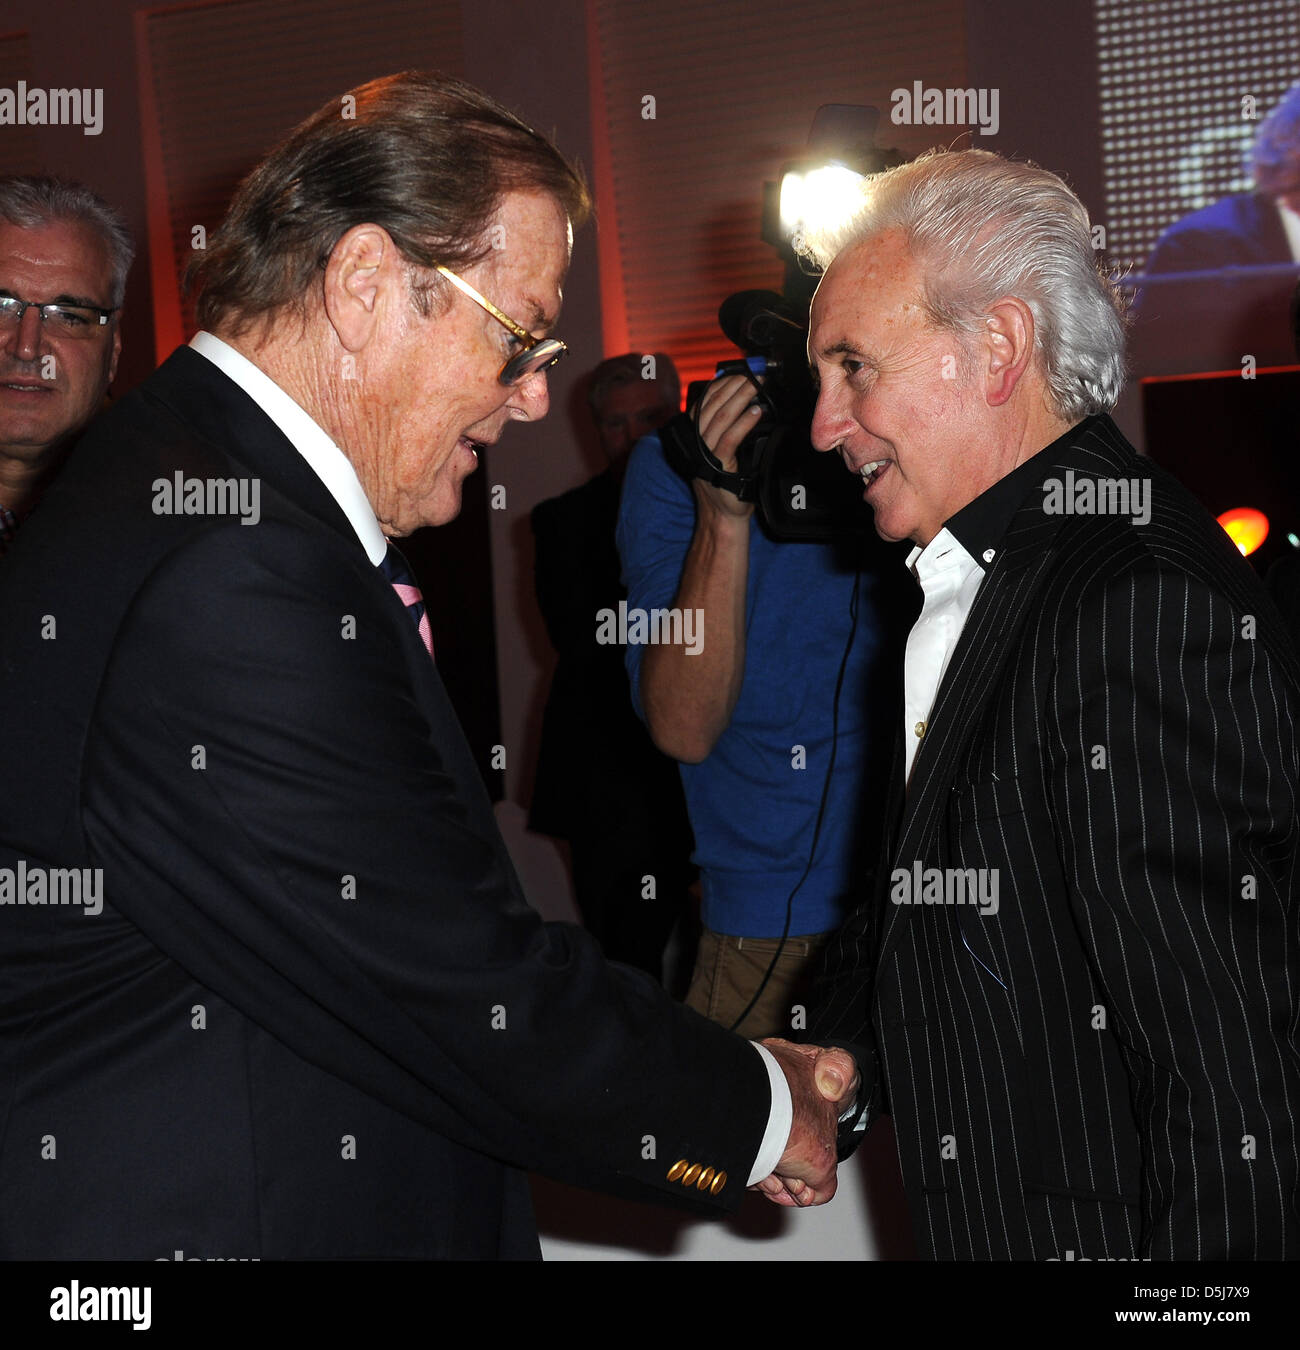 British singer Tony Christie (r) and British actor Sir Roger Moore greet at the Get Together Party of the Hermes Eagles Golf cup at Nobilis Robinson Club in Belek, Turkey, 16 November 2012. Celebrities from sports, film and economy play for foundations such as the childrens emergency funds and the Beckenbauer foundation. Photo: Ursula Dueren Stock Photo